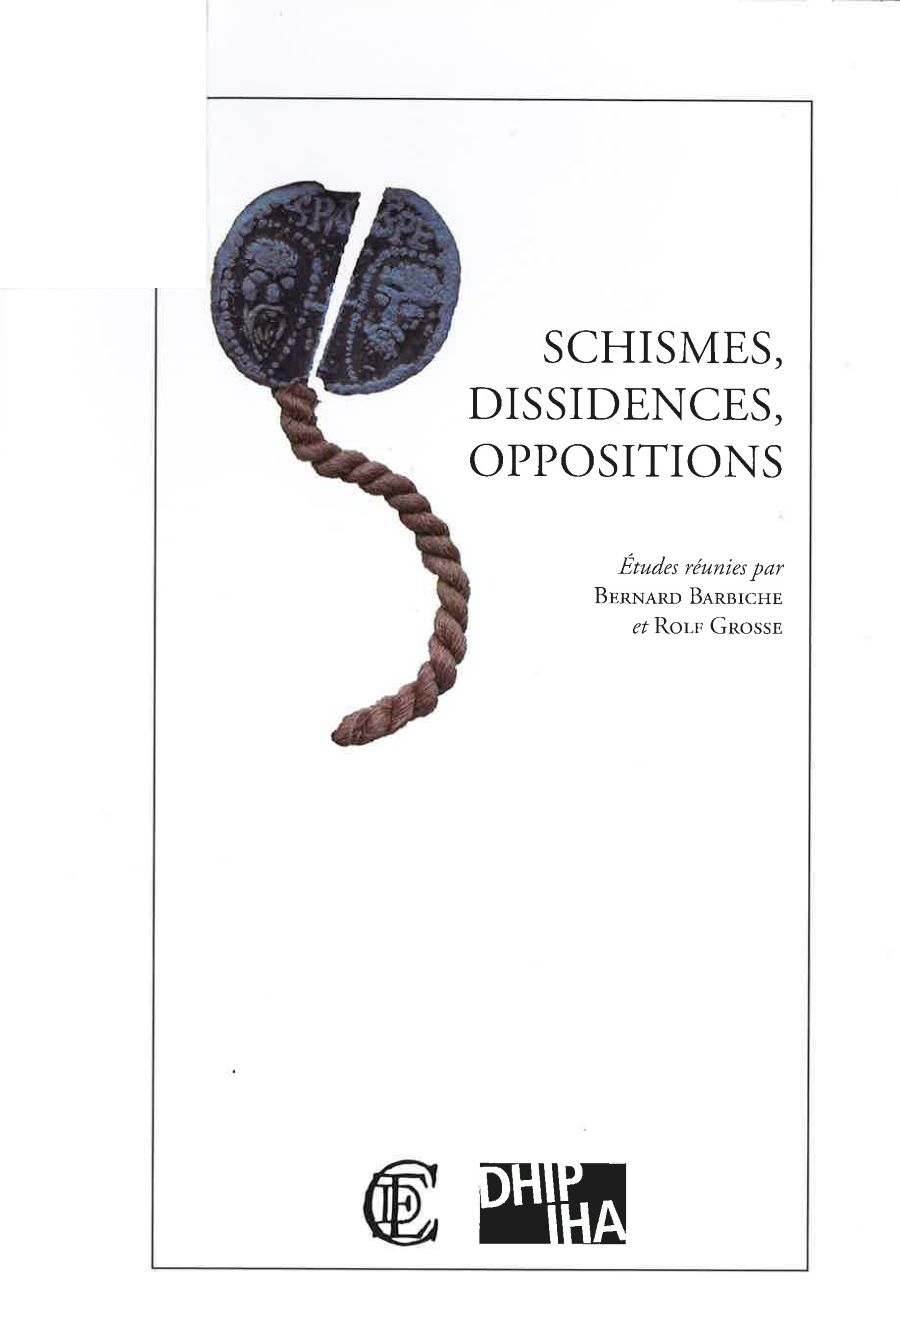 Schismes, dissidences, oppositions